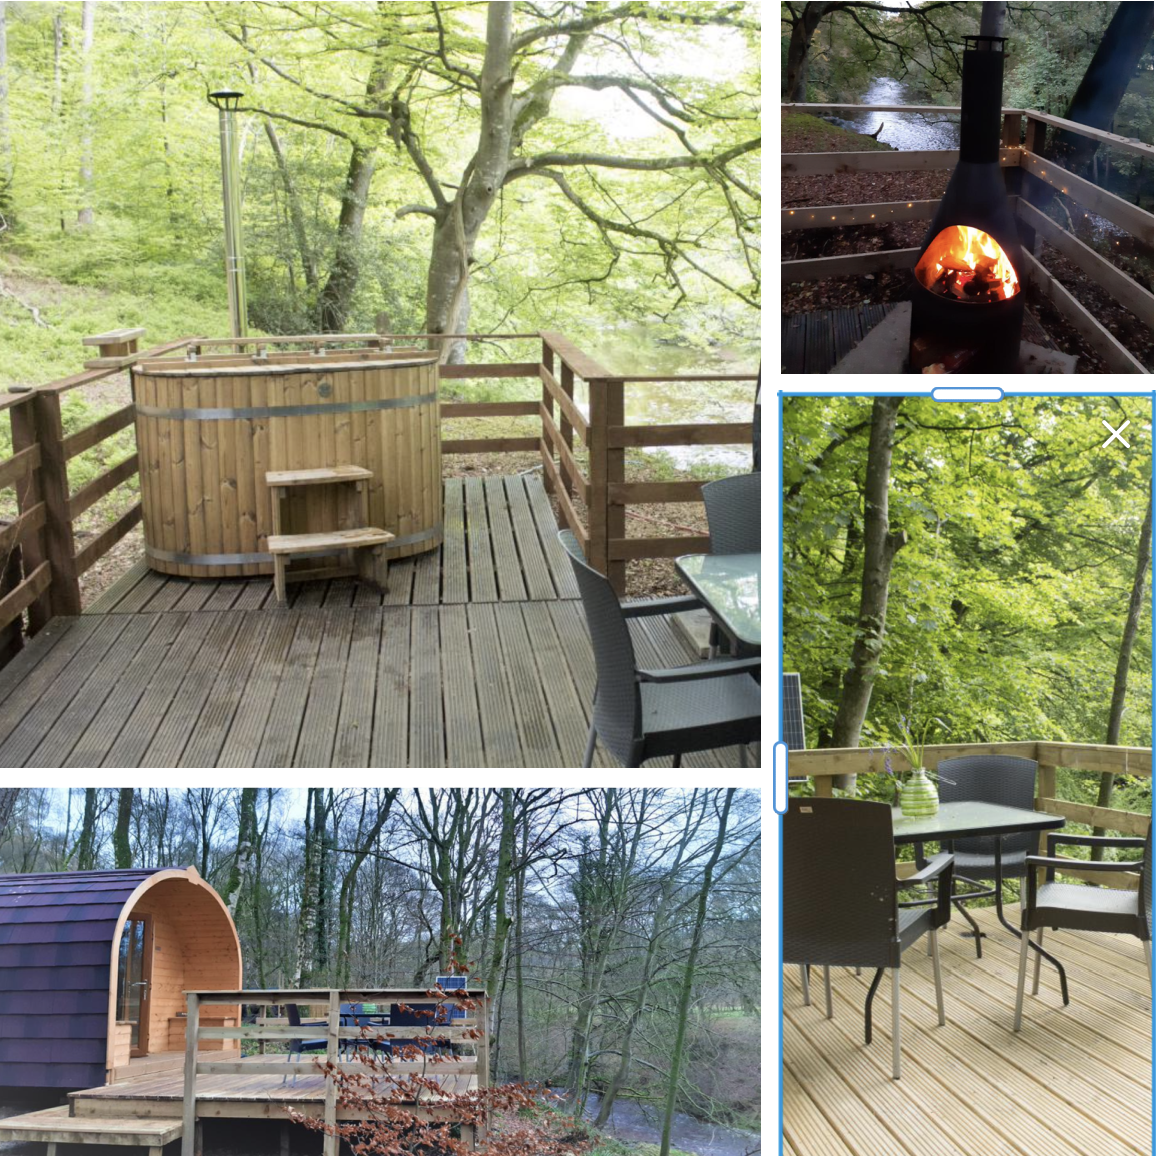 Cumbria eco friendly camping pods with hot tub and fire pit